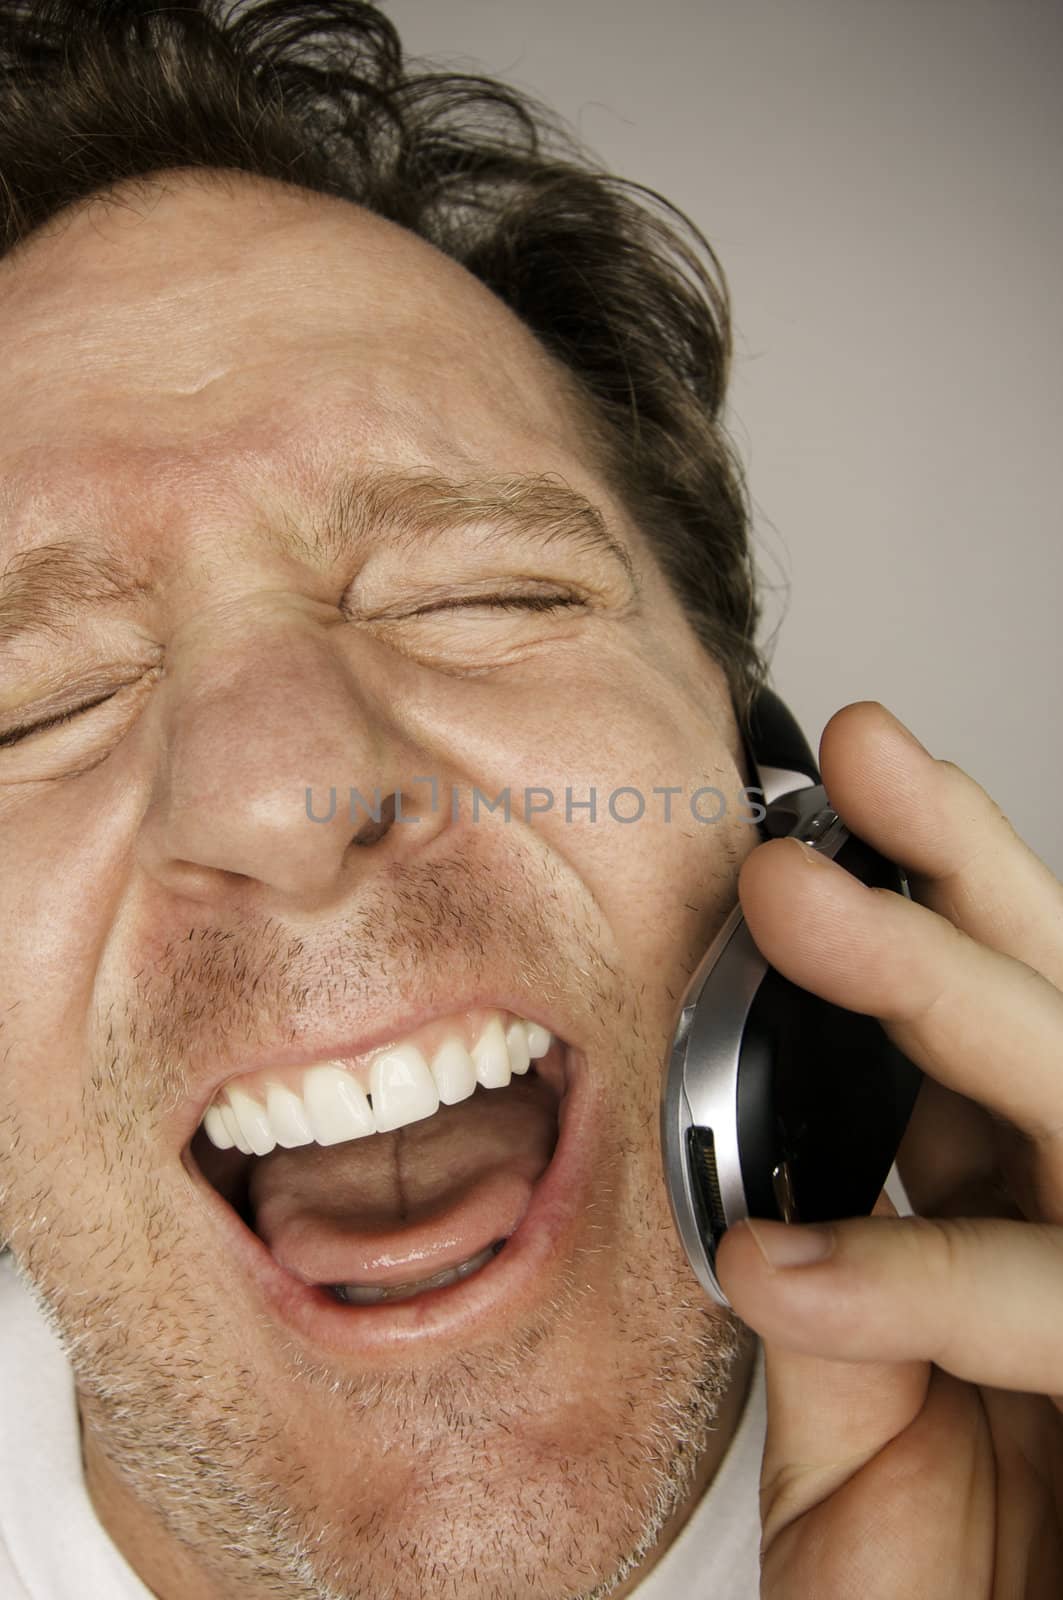 Ecstatically Happy Laughing Man on Cell Phone.